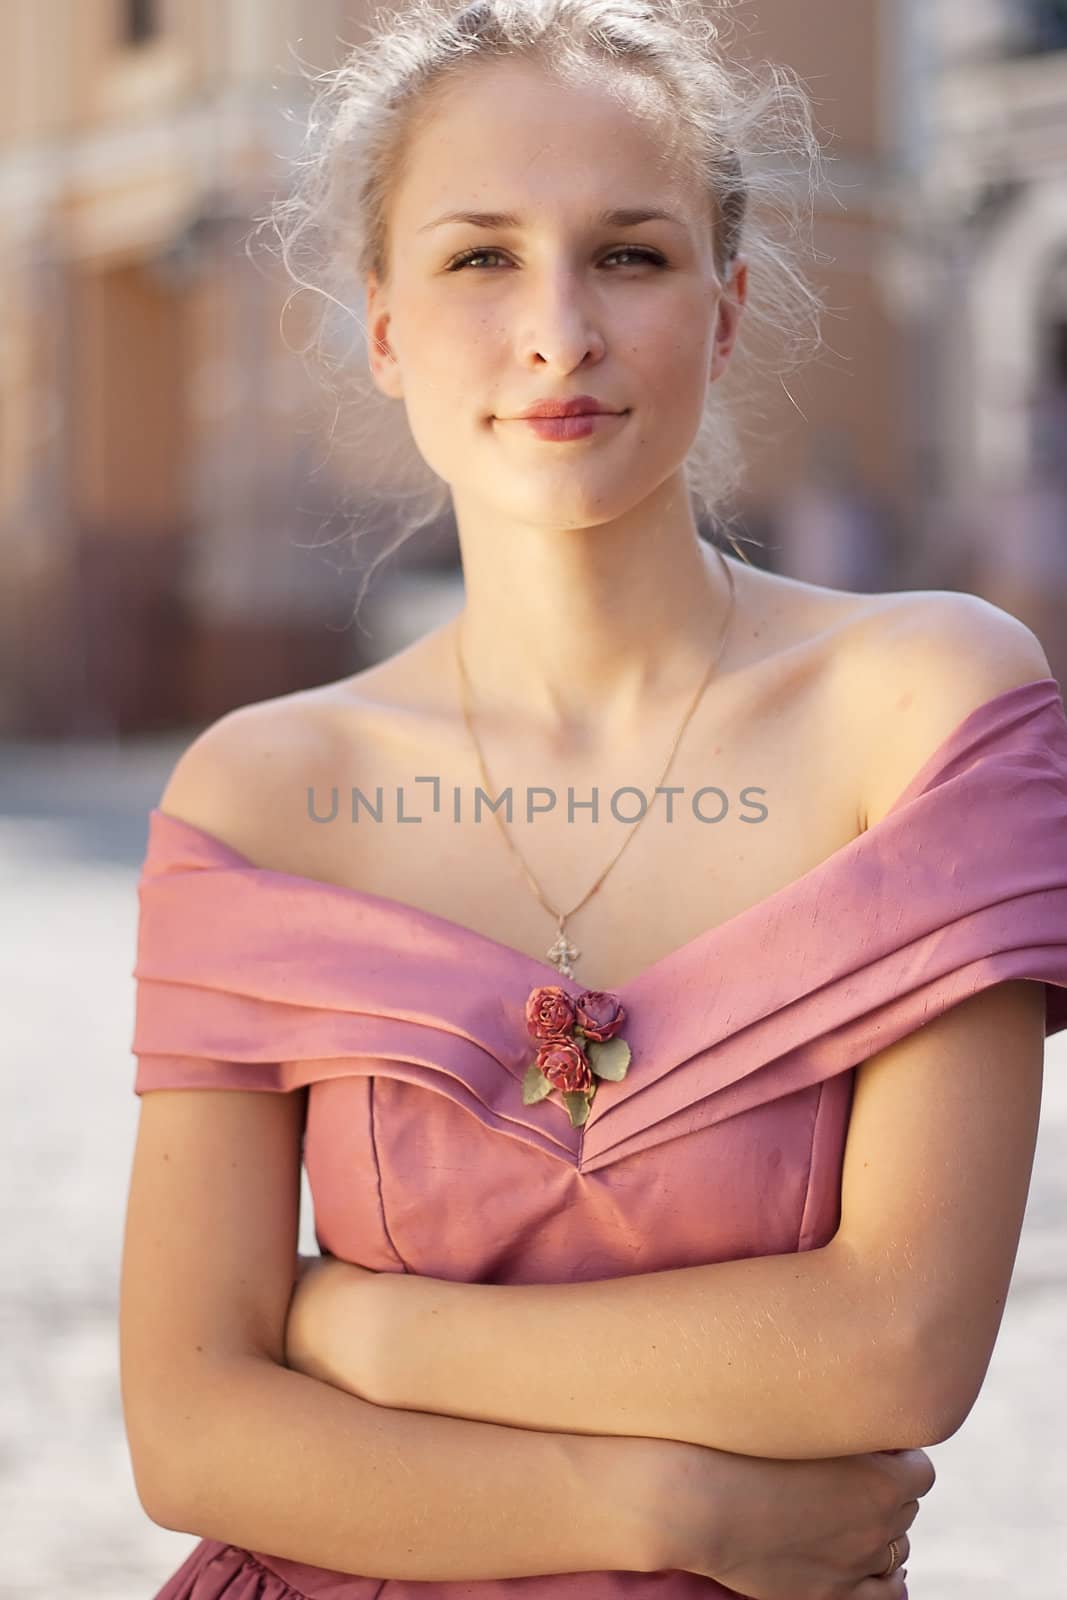 Portrait of a girl in a dress on a background of the city